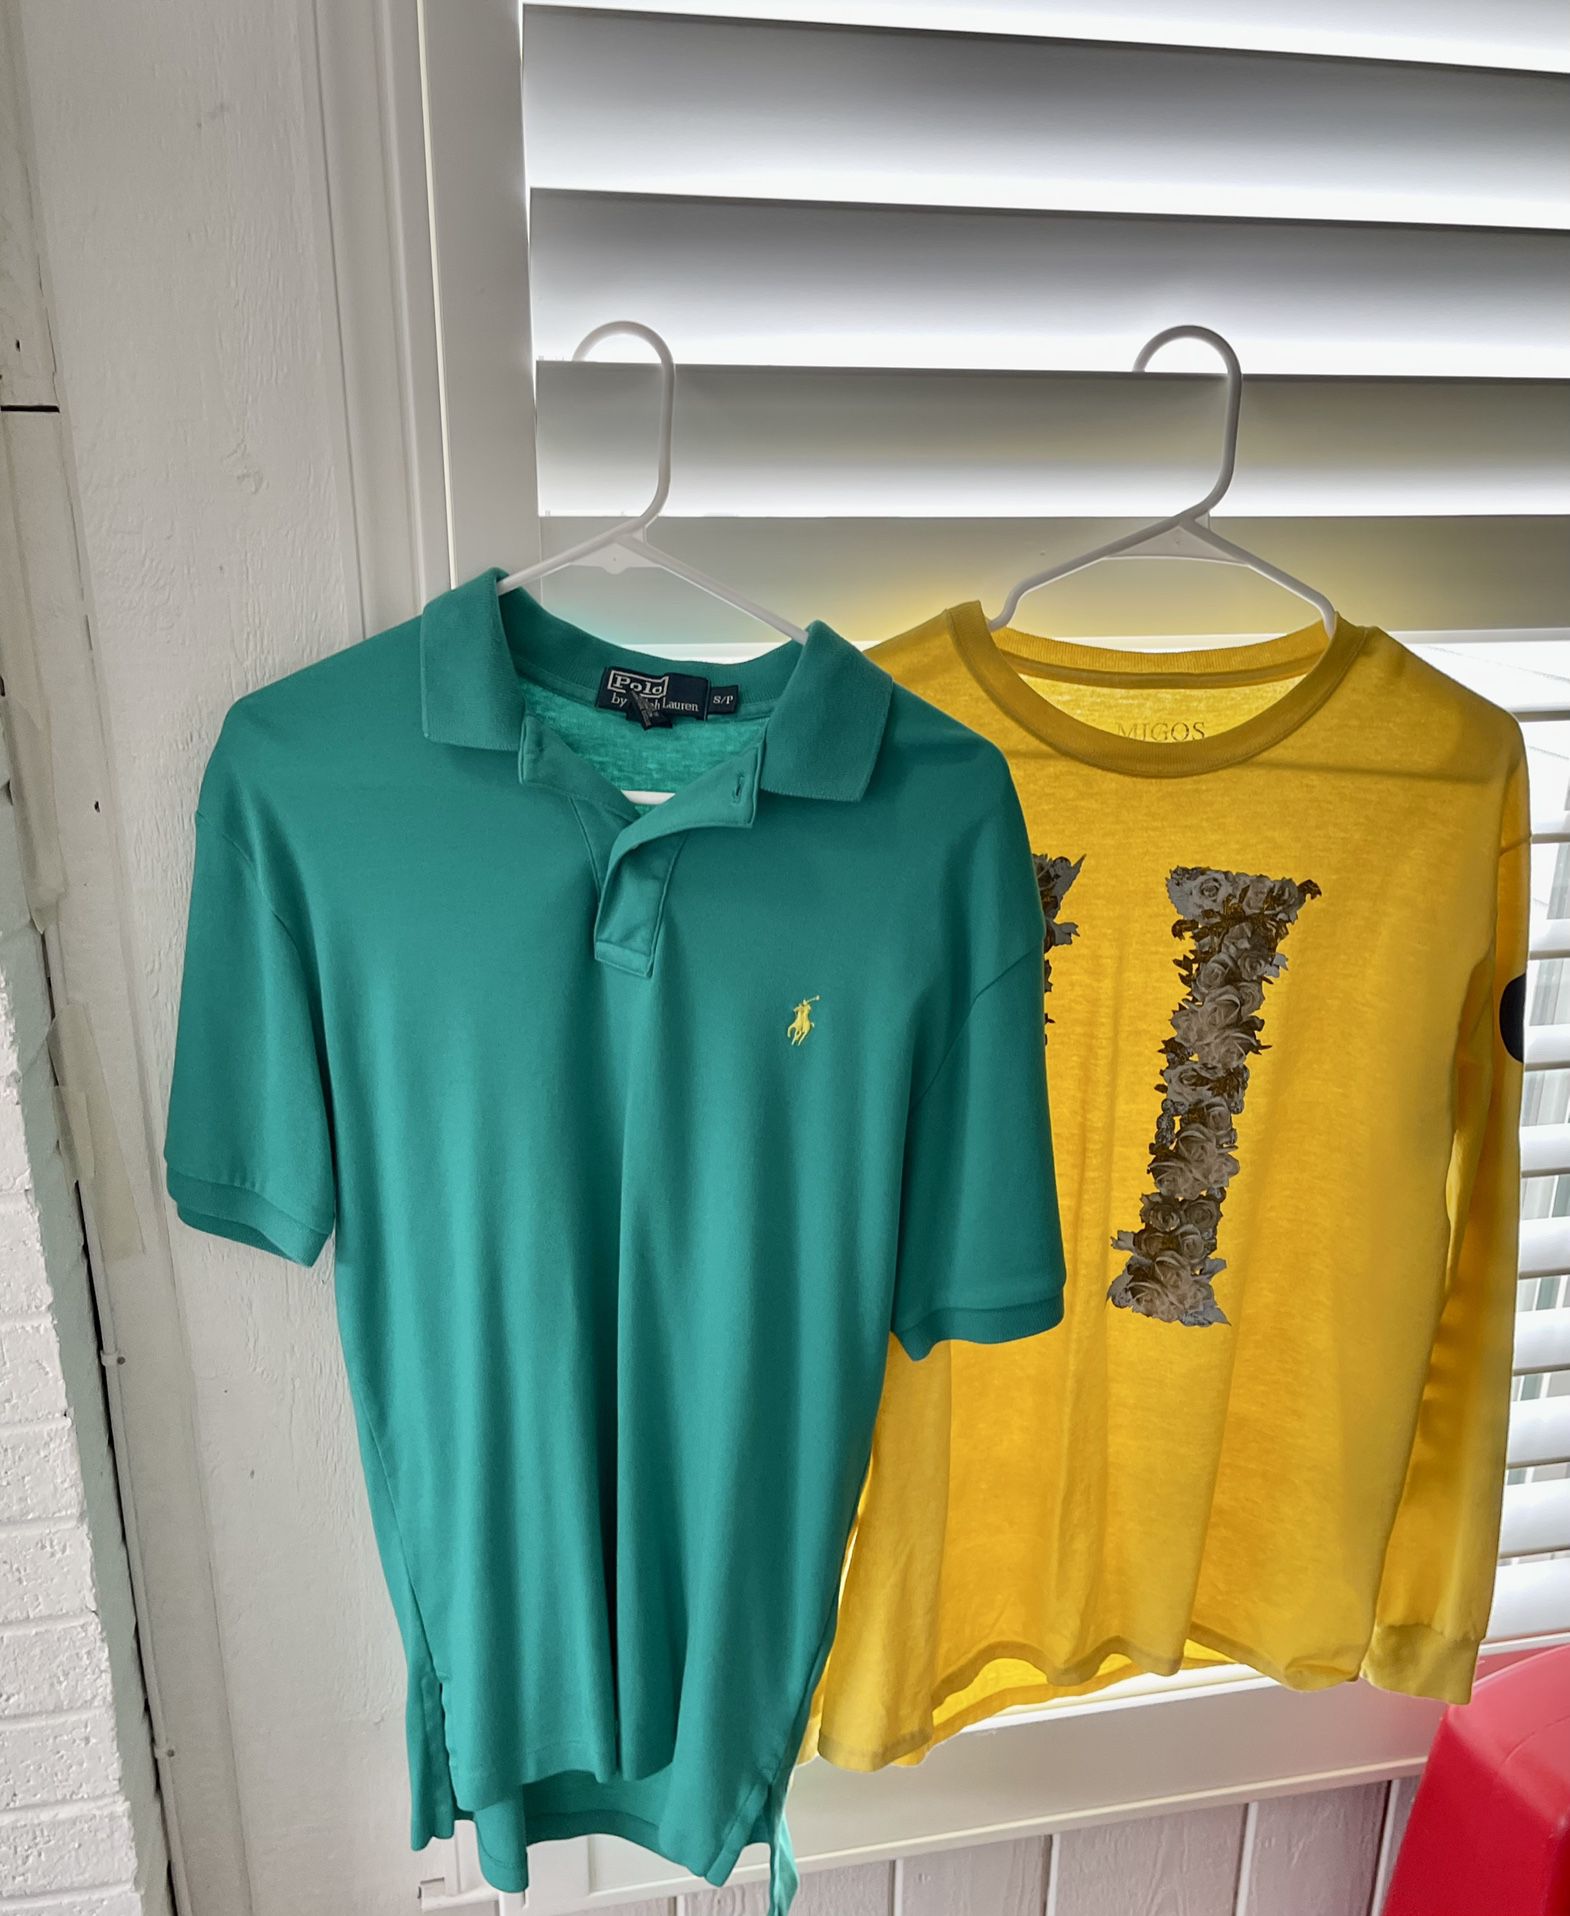 Trendy Teen Or Young Mens Nice Shirts, Ralph Lauren And Minor 